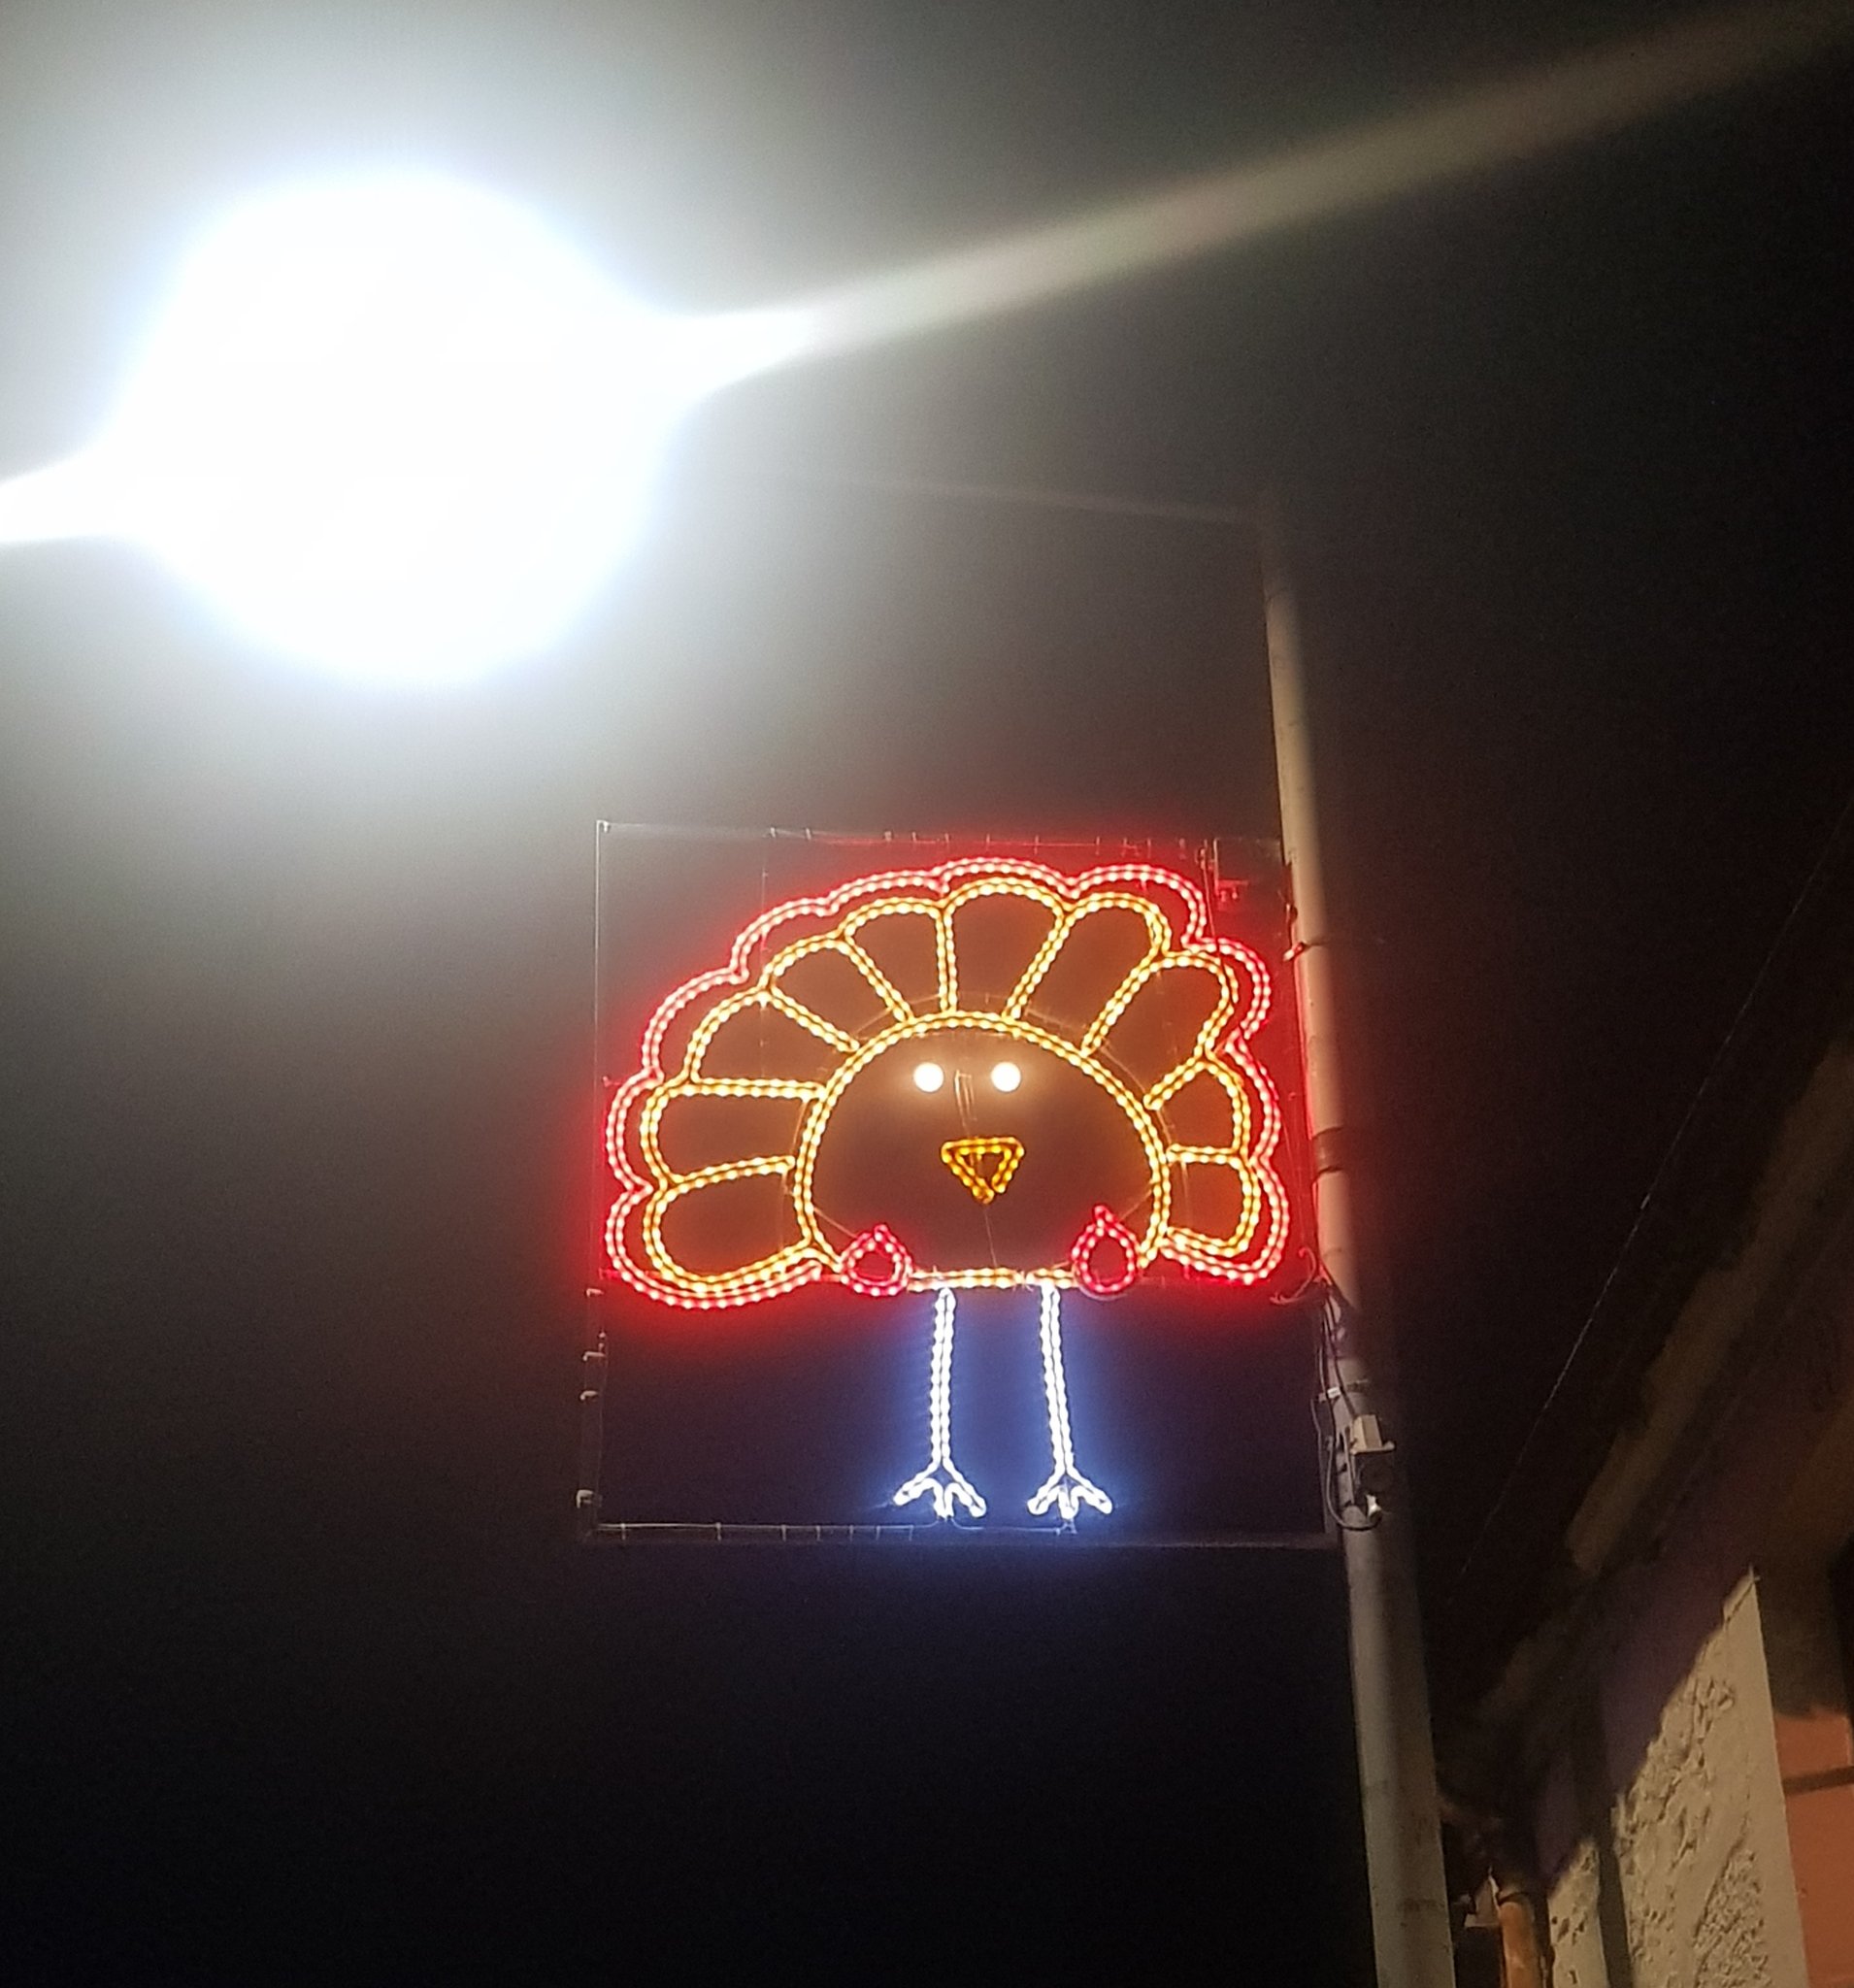 A photo of a city's Christmas lights on a light pole, in the shape of a child's drawing of a turkey